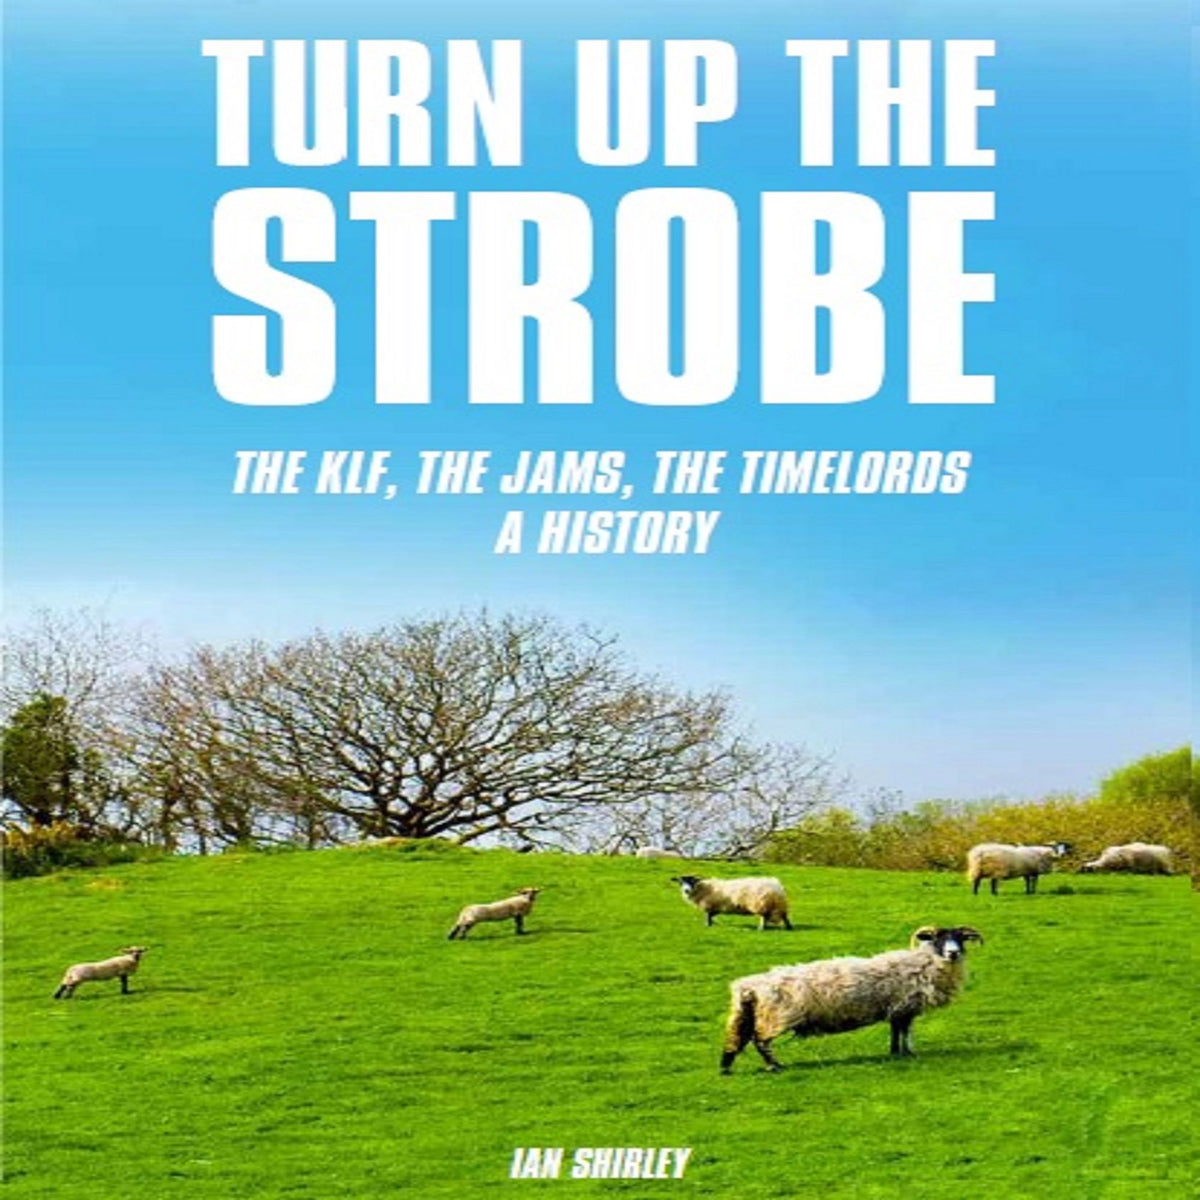 Ian Shirley: Turn Up The Strobe: The KLF, The Jams, The Timelords ~ A History